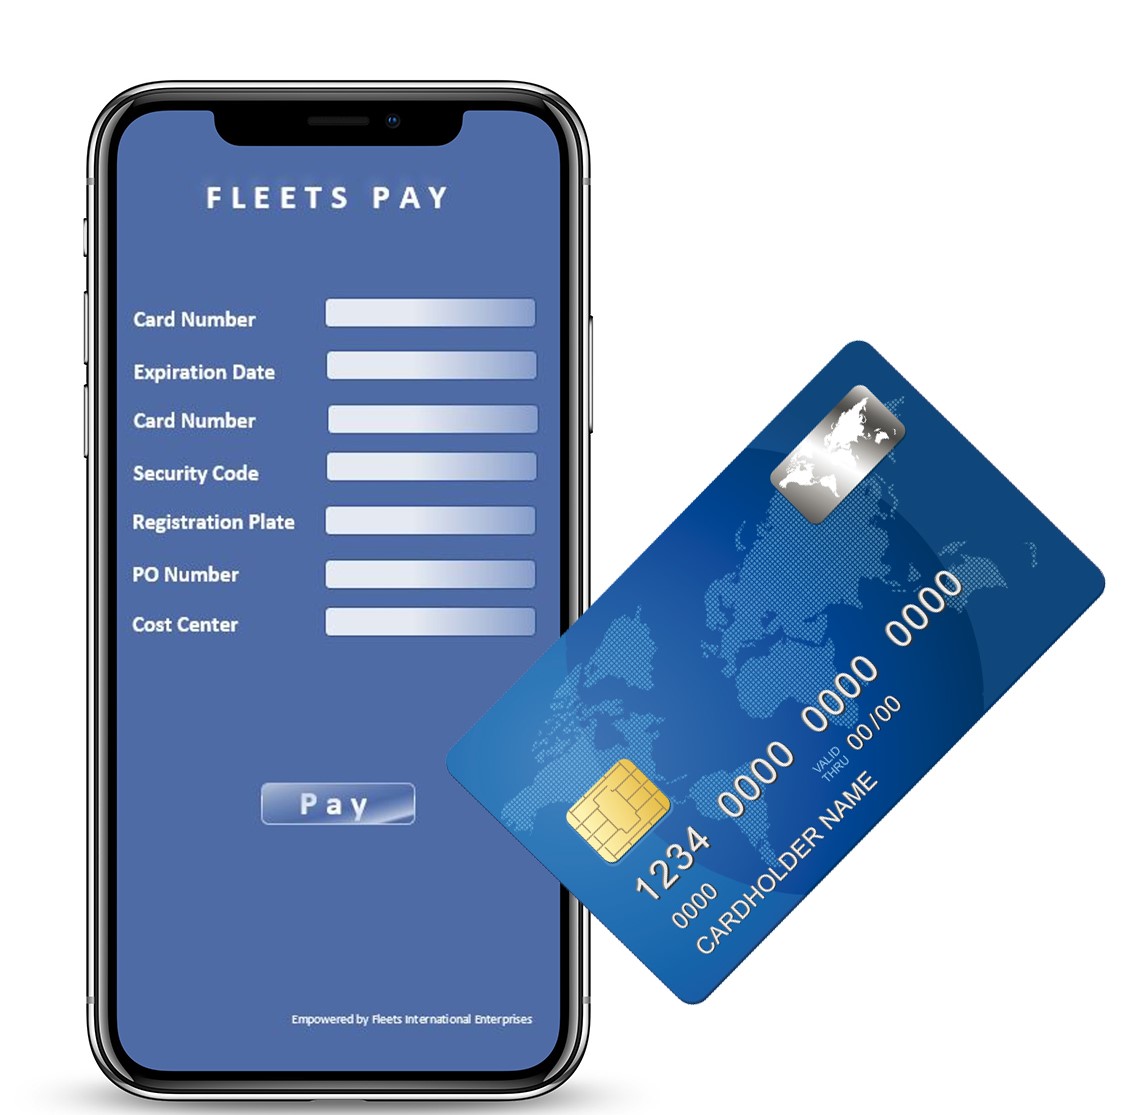 FIE - FleetsPay - Mobility Payments